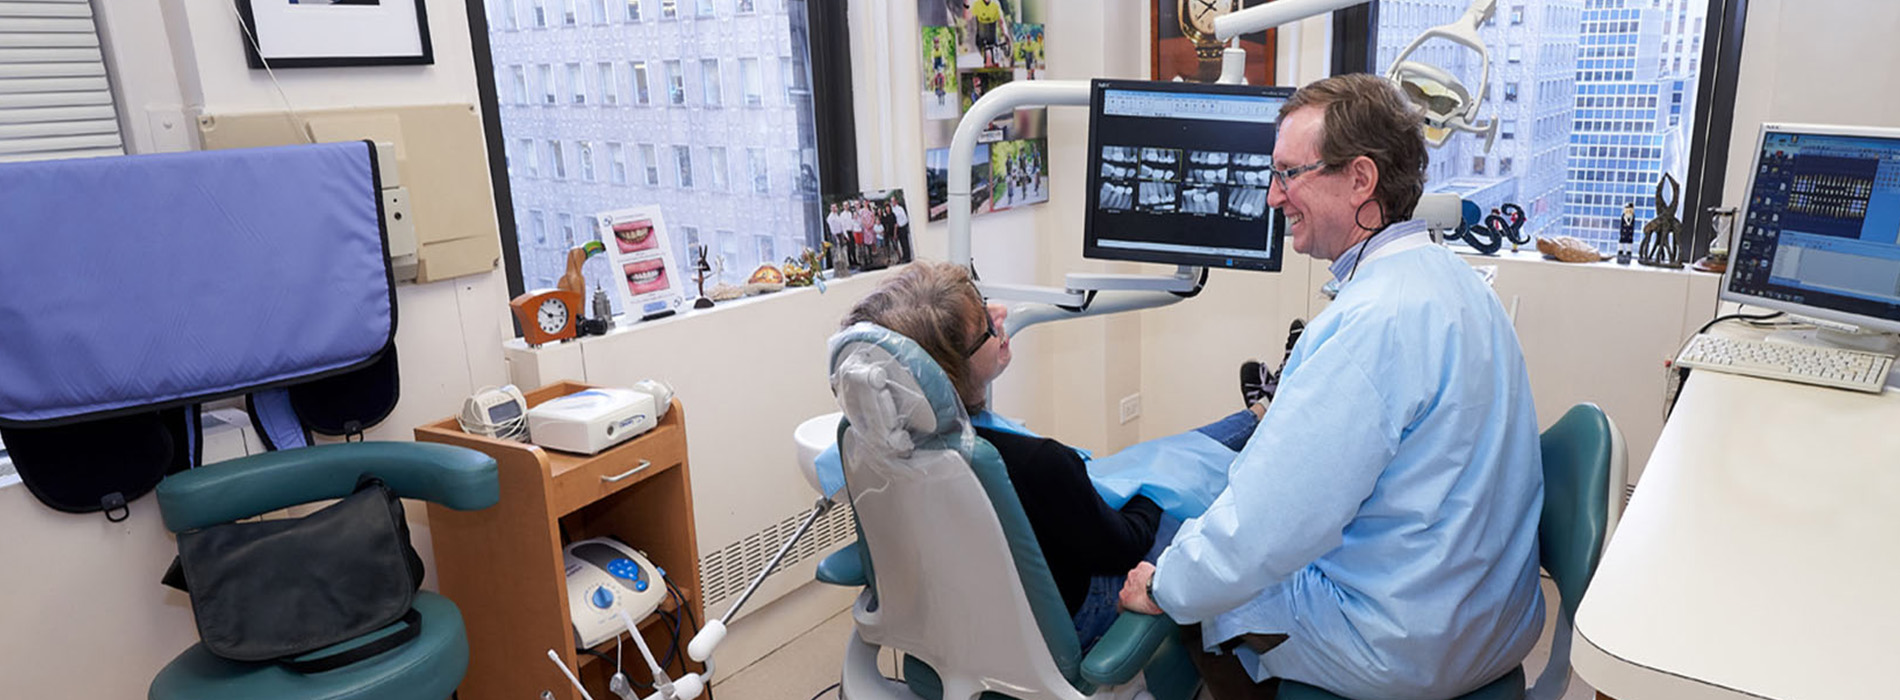 The image shows a dental office setting with a dentist seated at a chair, examining a patient s mouth.